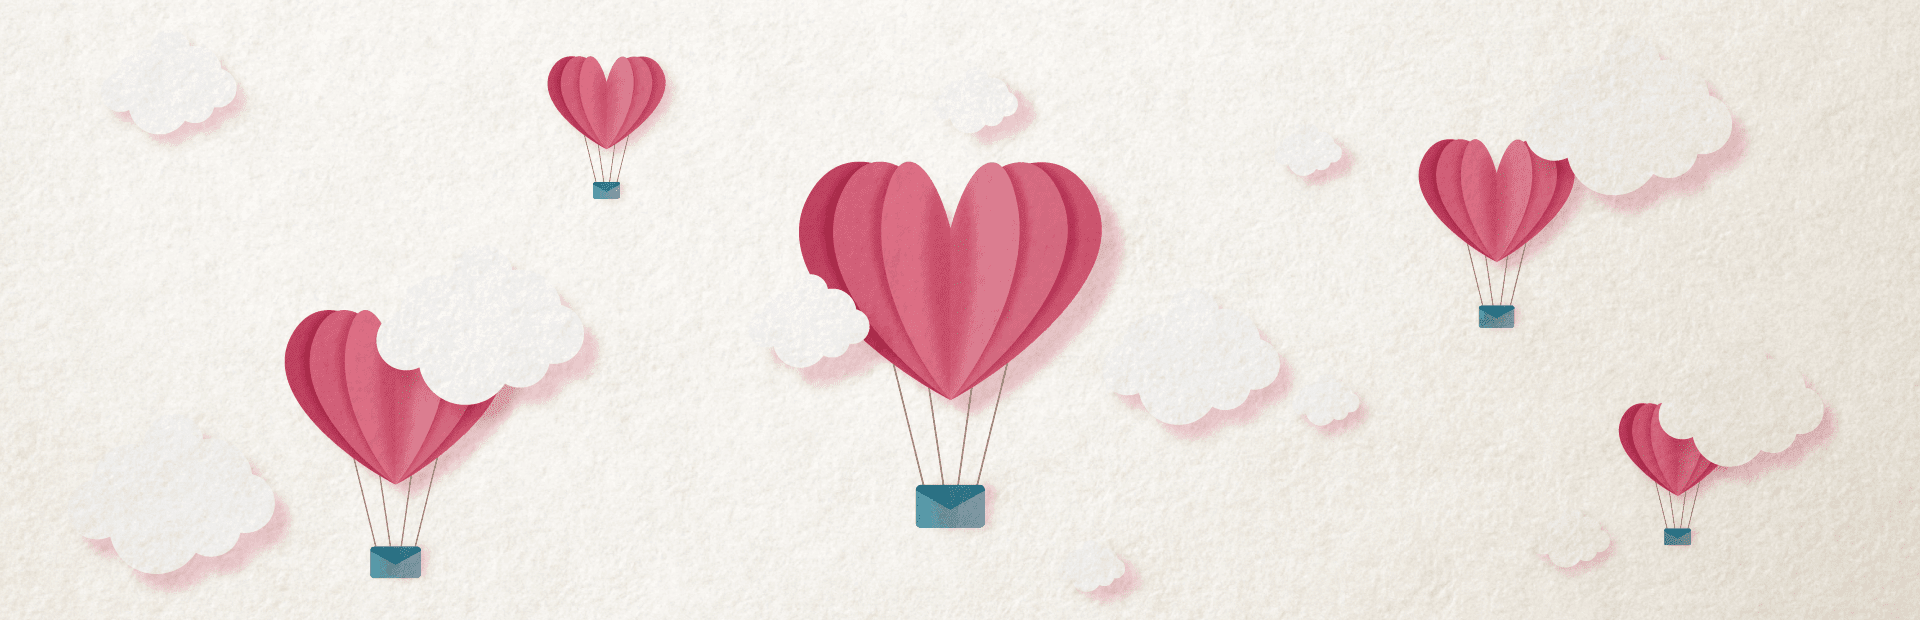 15 greatest concepts for St Valentine’s e-mail newsletters — Stripo.e-mail